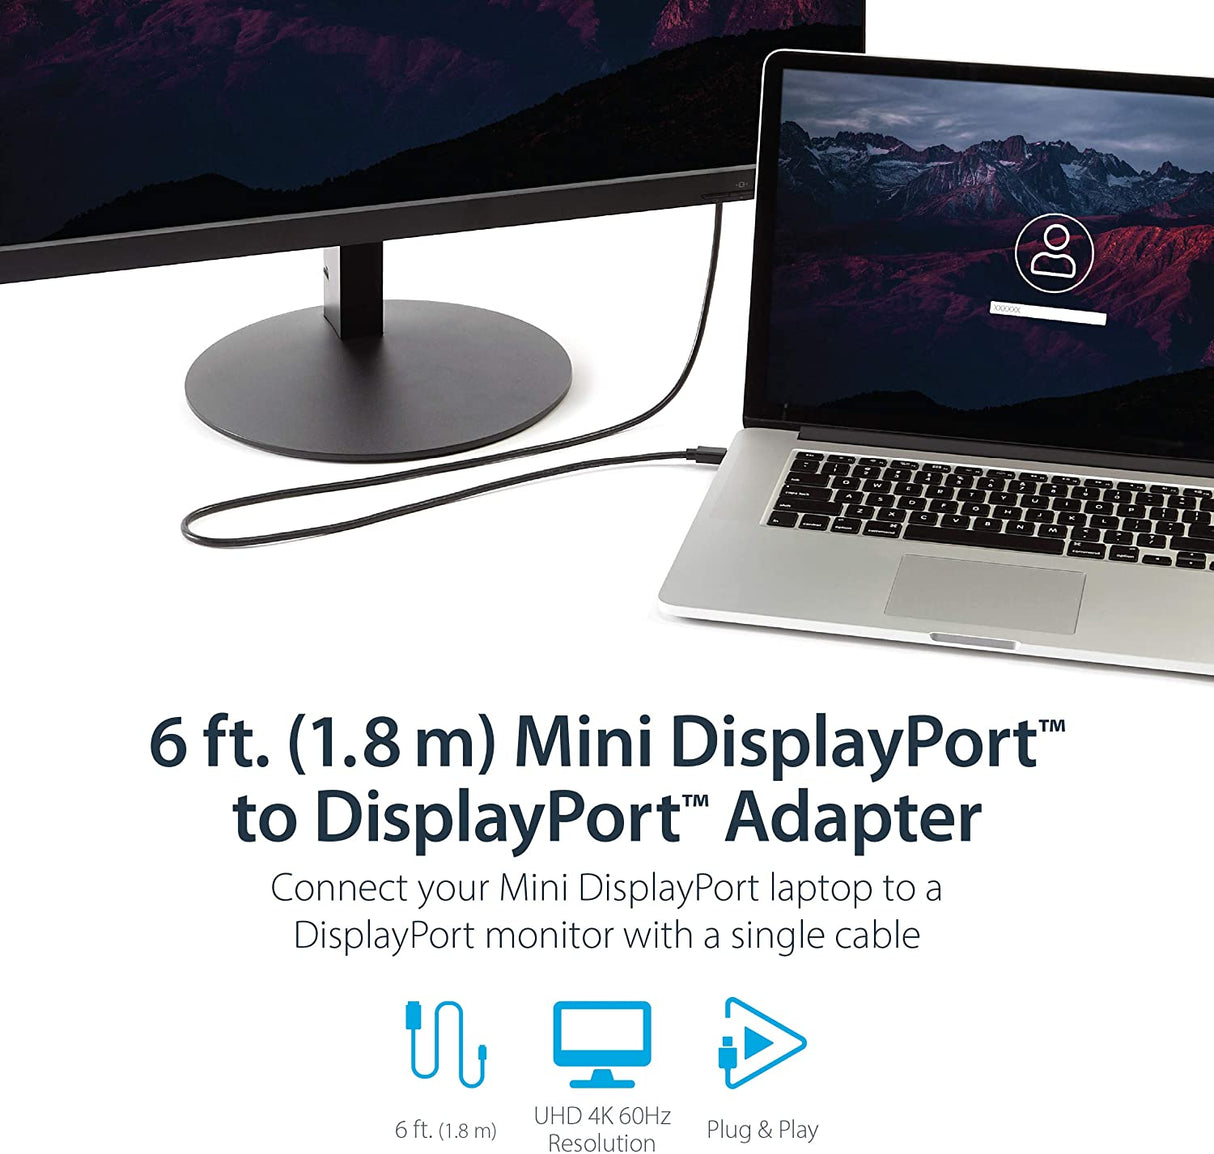 StarTech.com 6ft (2m) Mini DisplayPort to DisplayPort 1.2 Cable - 4K x 2K UHD Mini DisplayPort to DisplayPort Adapter Cable - Mini DP to DP Cable for Monitor - mDP to DP Converter Cord (MDP2DPMM6) 6 ft / 2 m Black